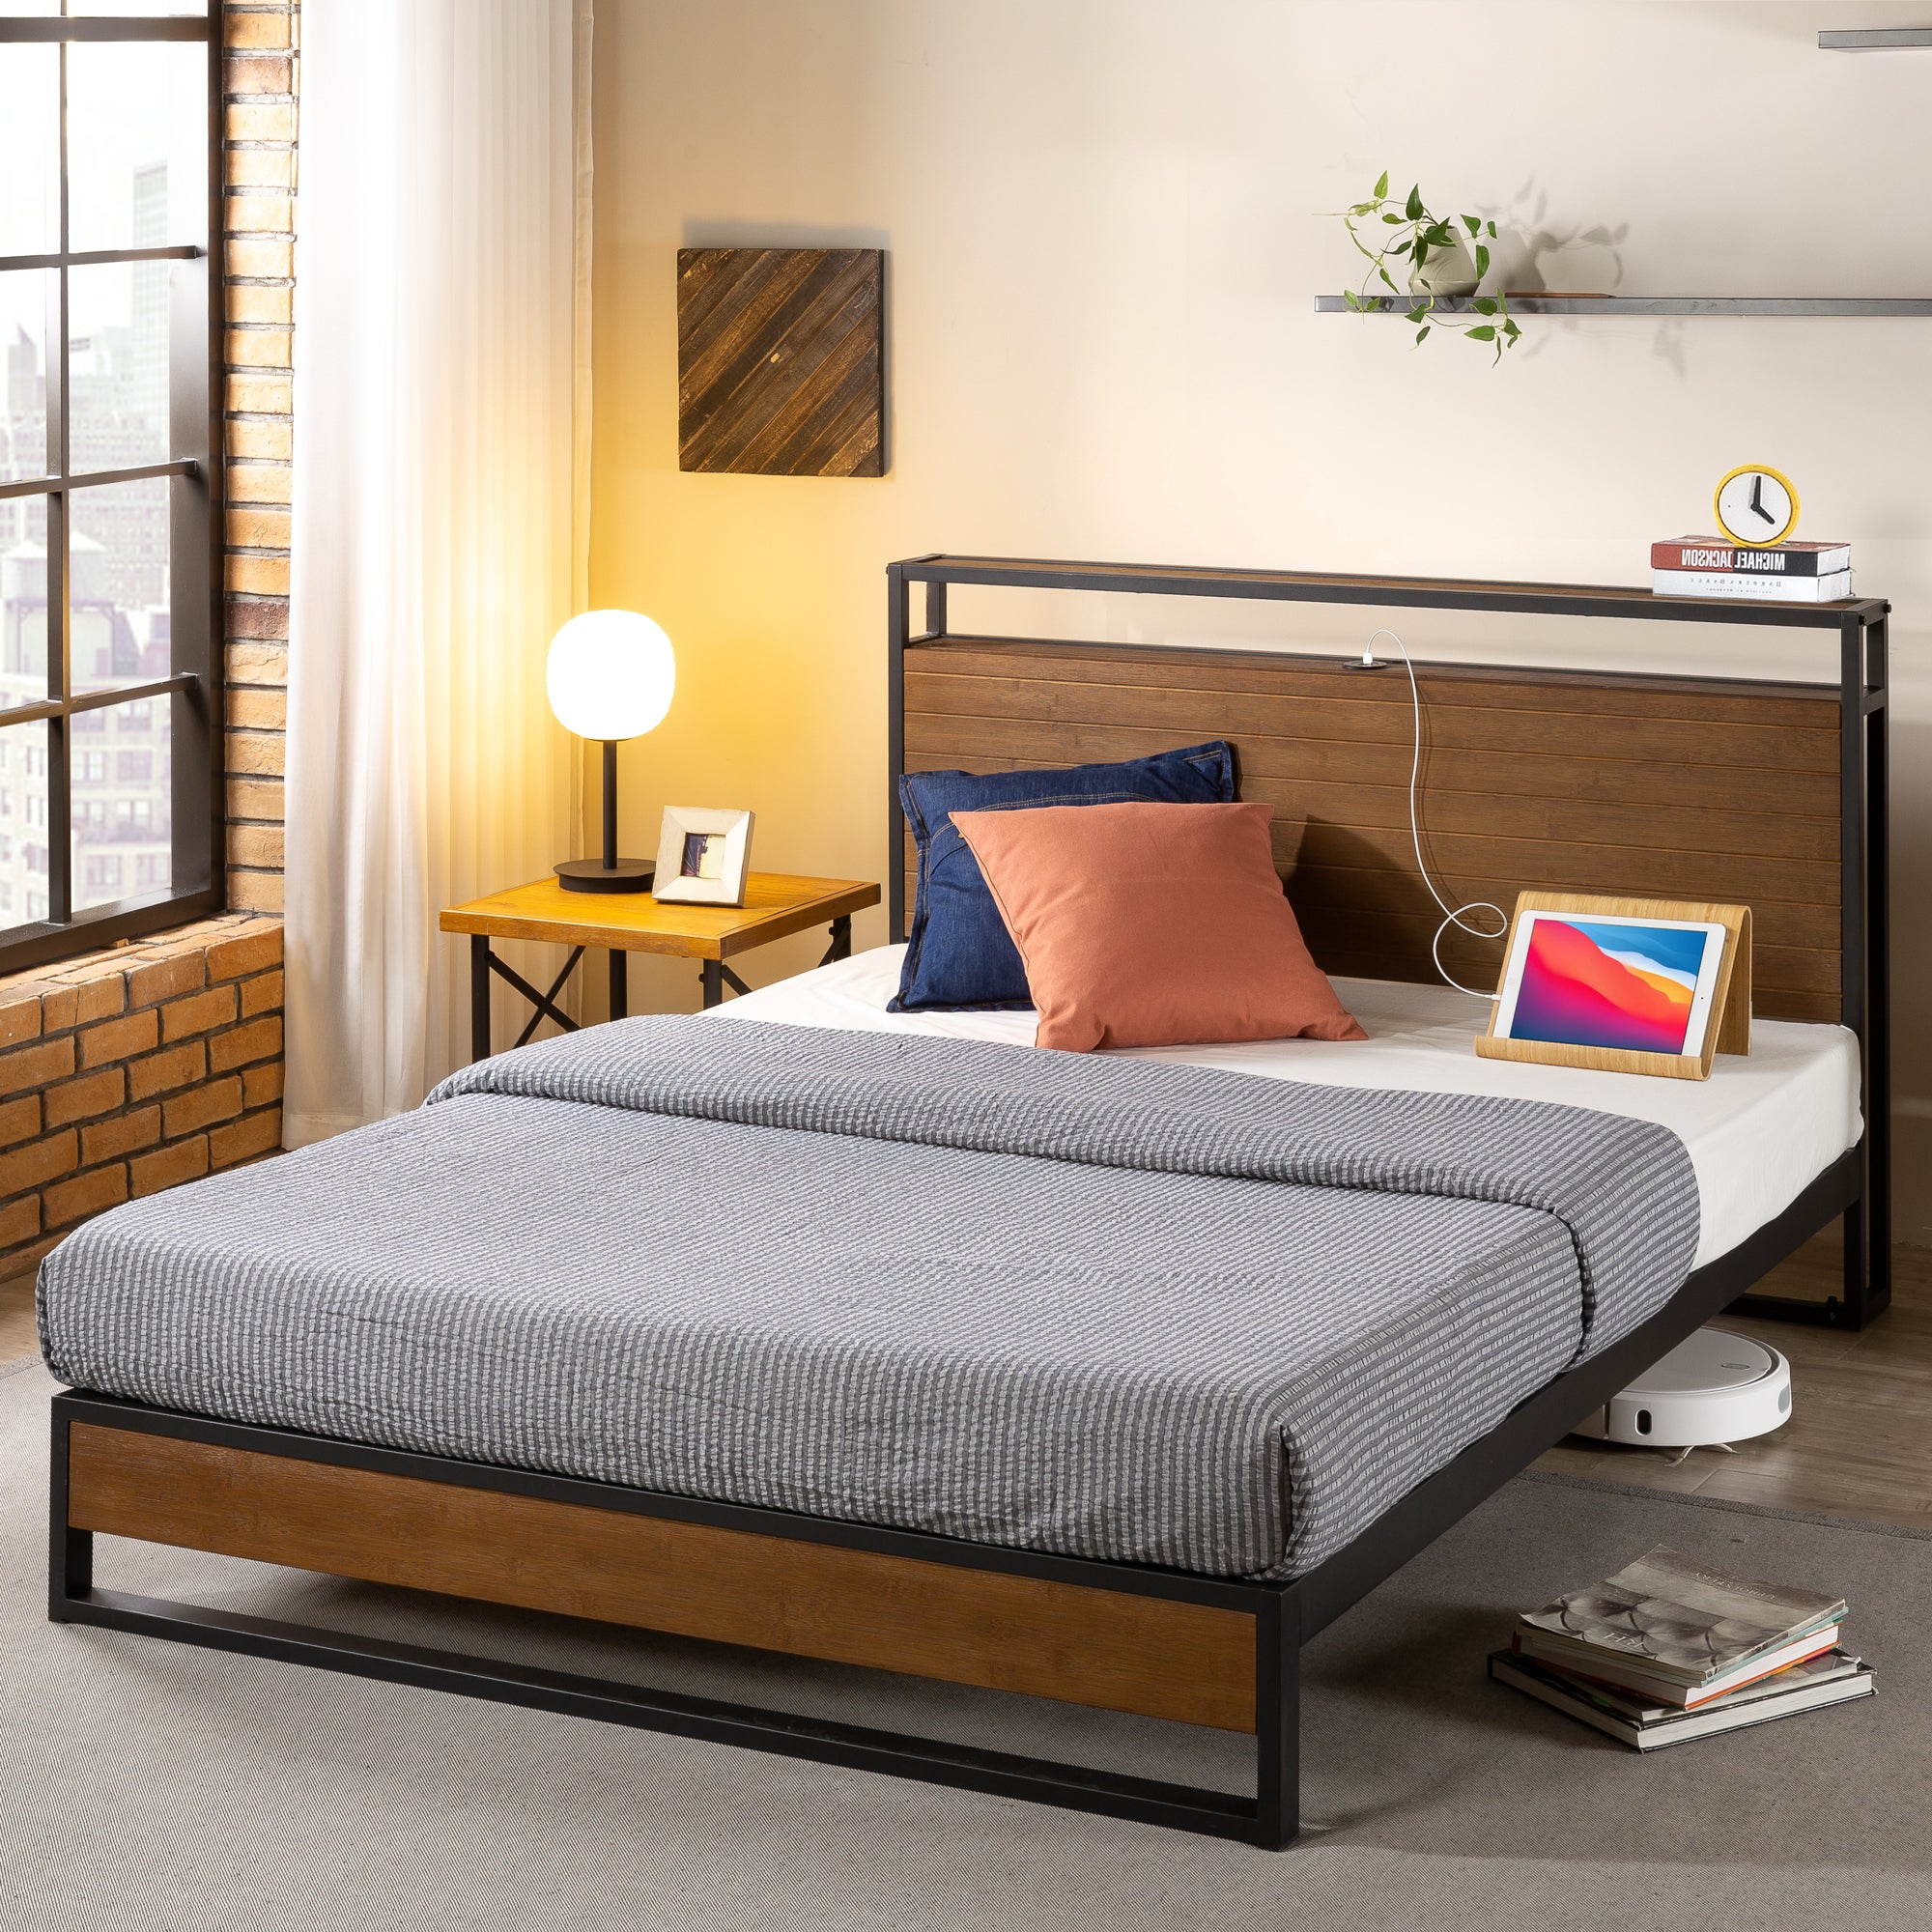 Zinus Ironline Industrial Metal And Pine Wood Bed Frame With Headboard Shelf And Usb Port 